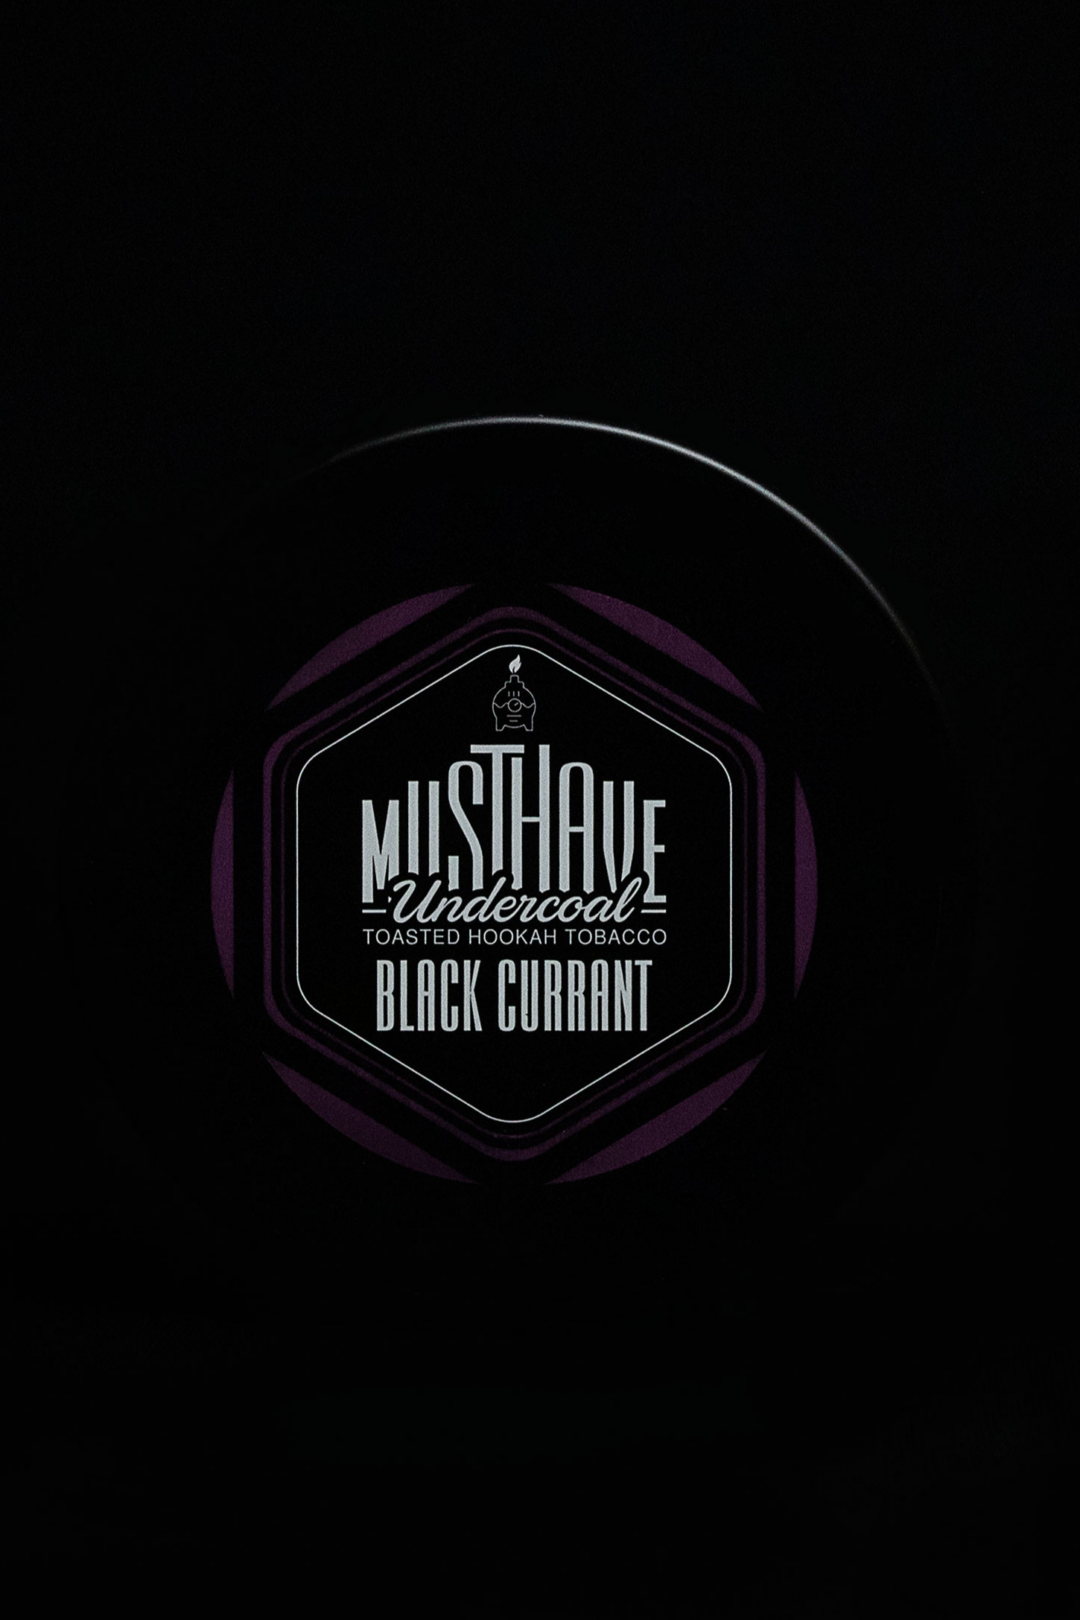 Musthave BLACK CURRANT